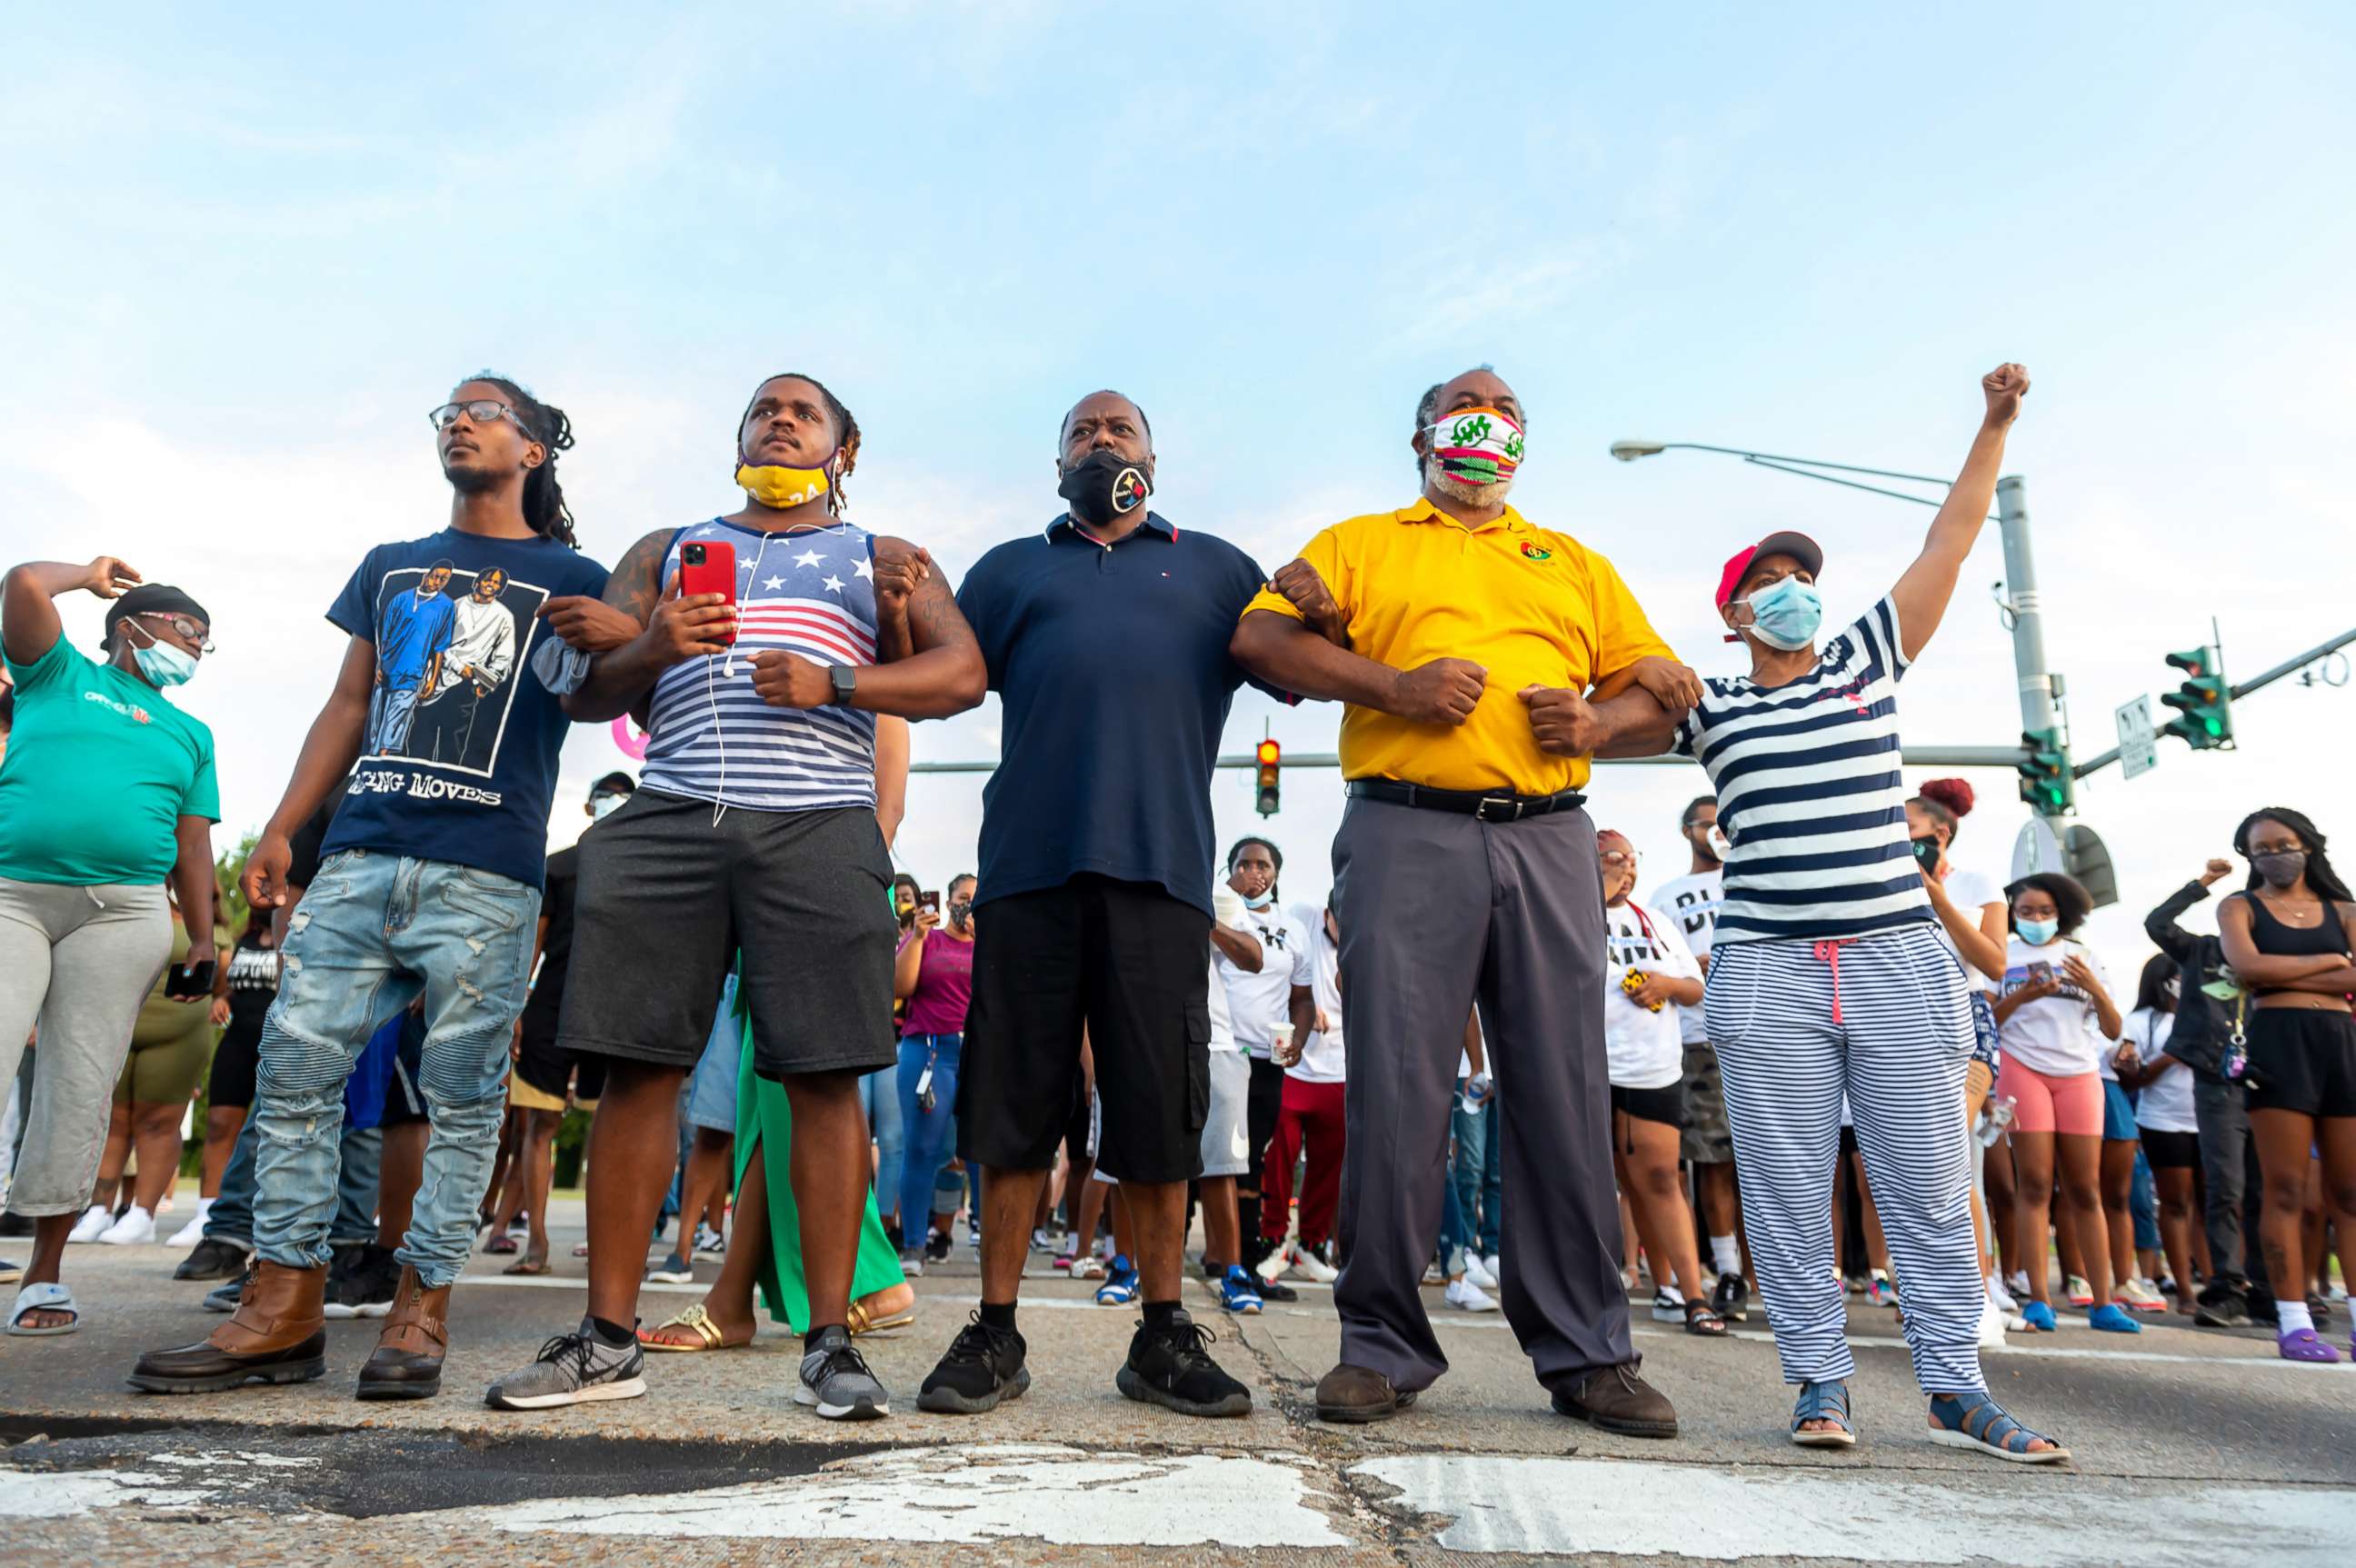 PHOTO: Protesters take to the street and block traffic at the intersection of Willow St and Evangeline Thruway after a vigil held for Trayford Pellerin, 31, who was shot and killed by Lafayette police officers while armed with a knife, Aug. 22, 2020.